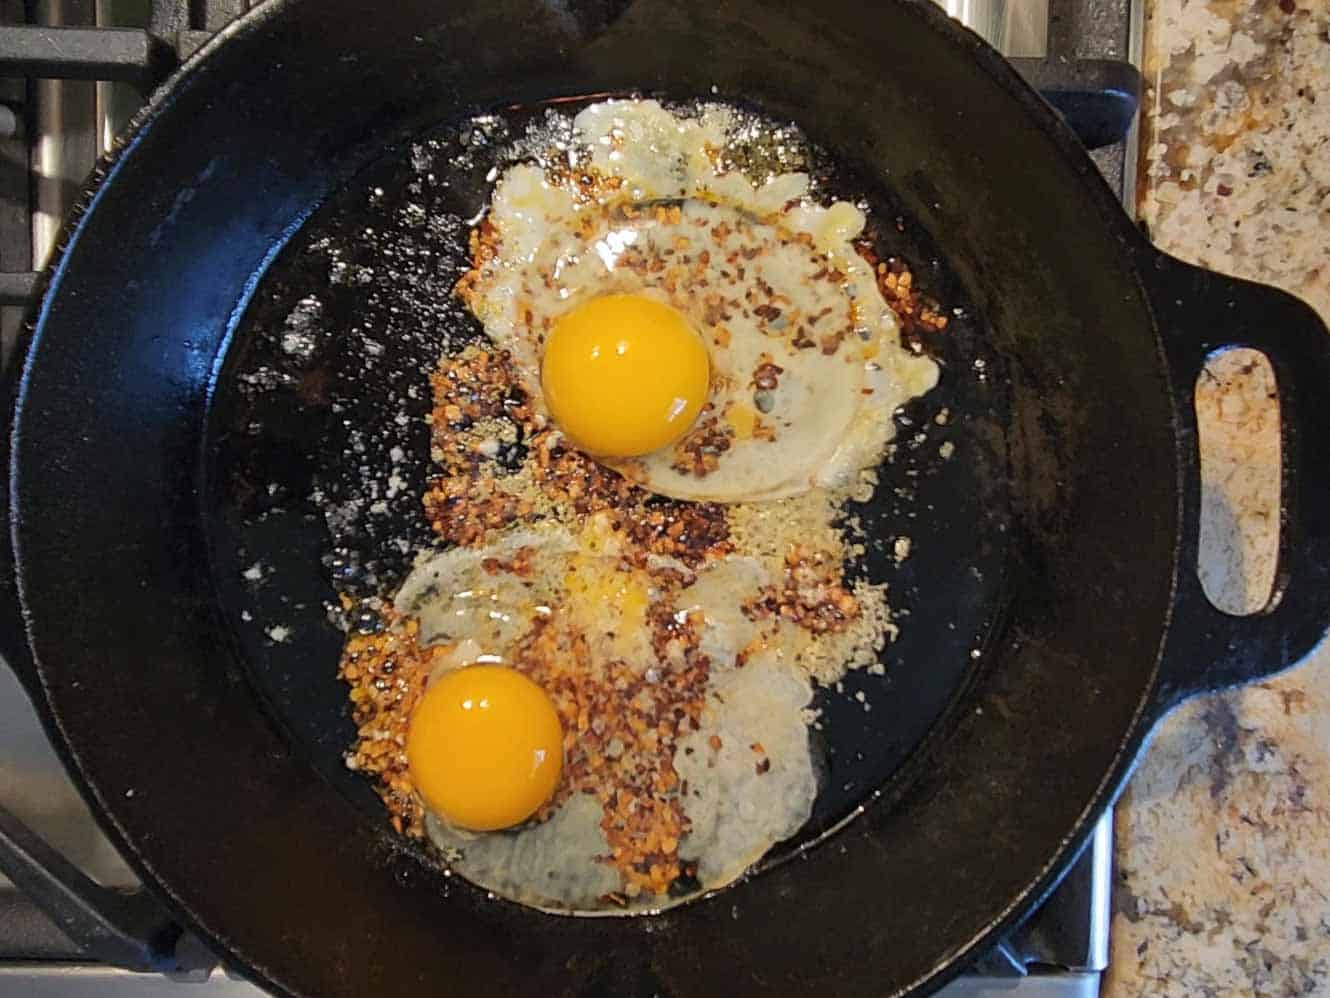 Two eggs frying in a hot skillet with spices.